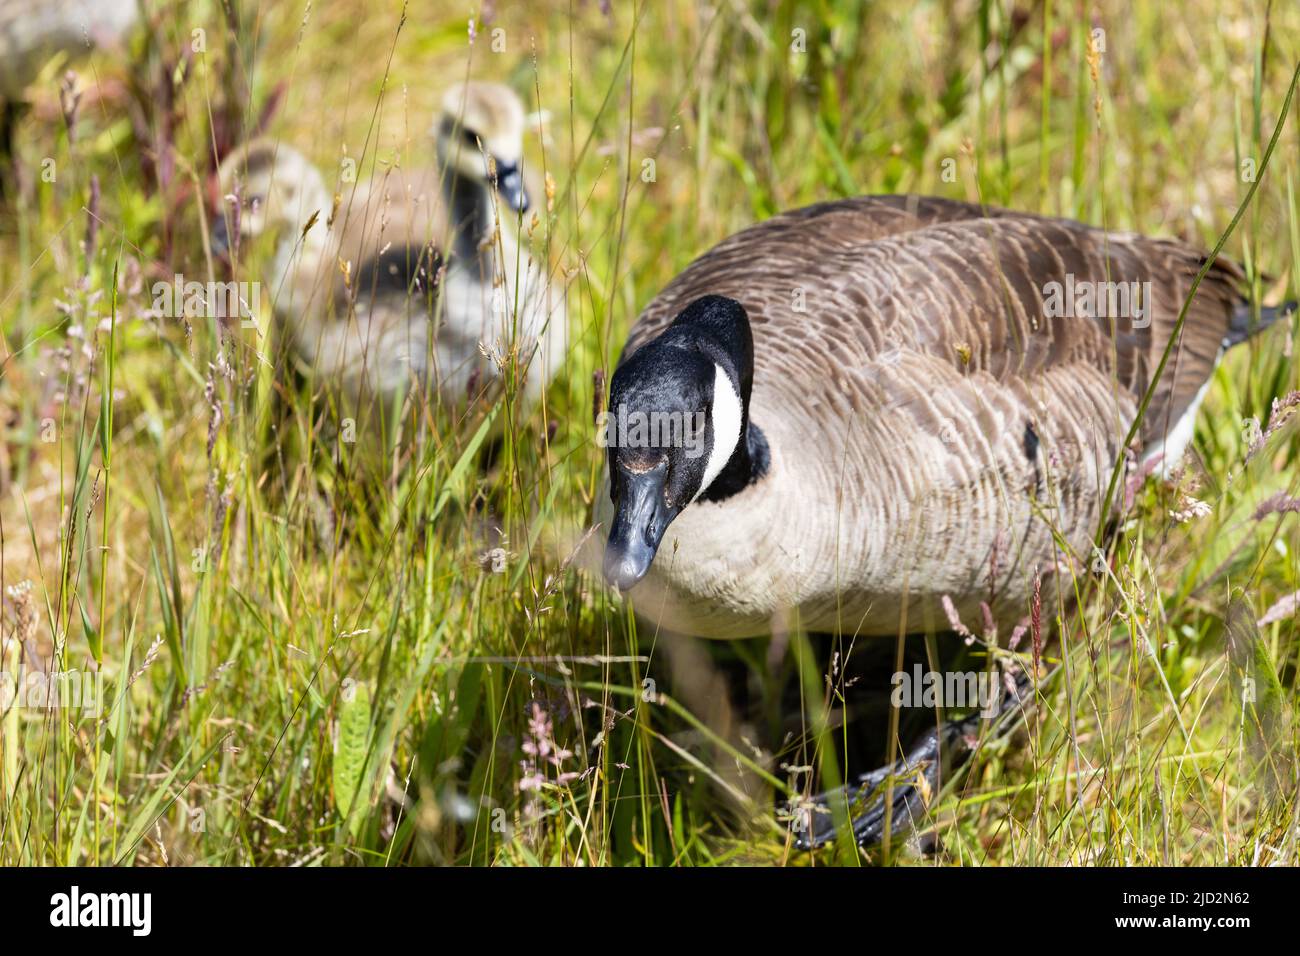 Adult Canada goose, Branta canadensis, with two chicks behind in the grass, Dorset, England Stock Photo